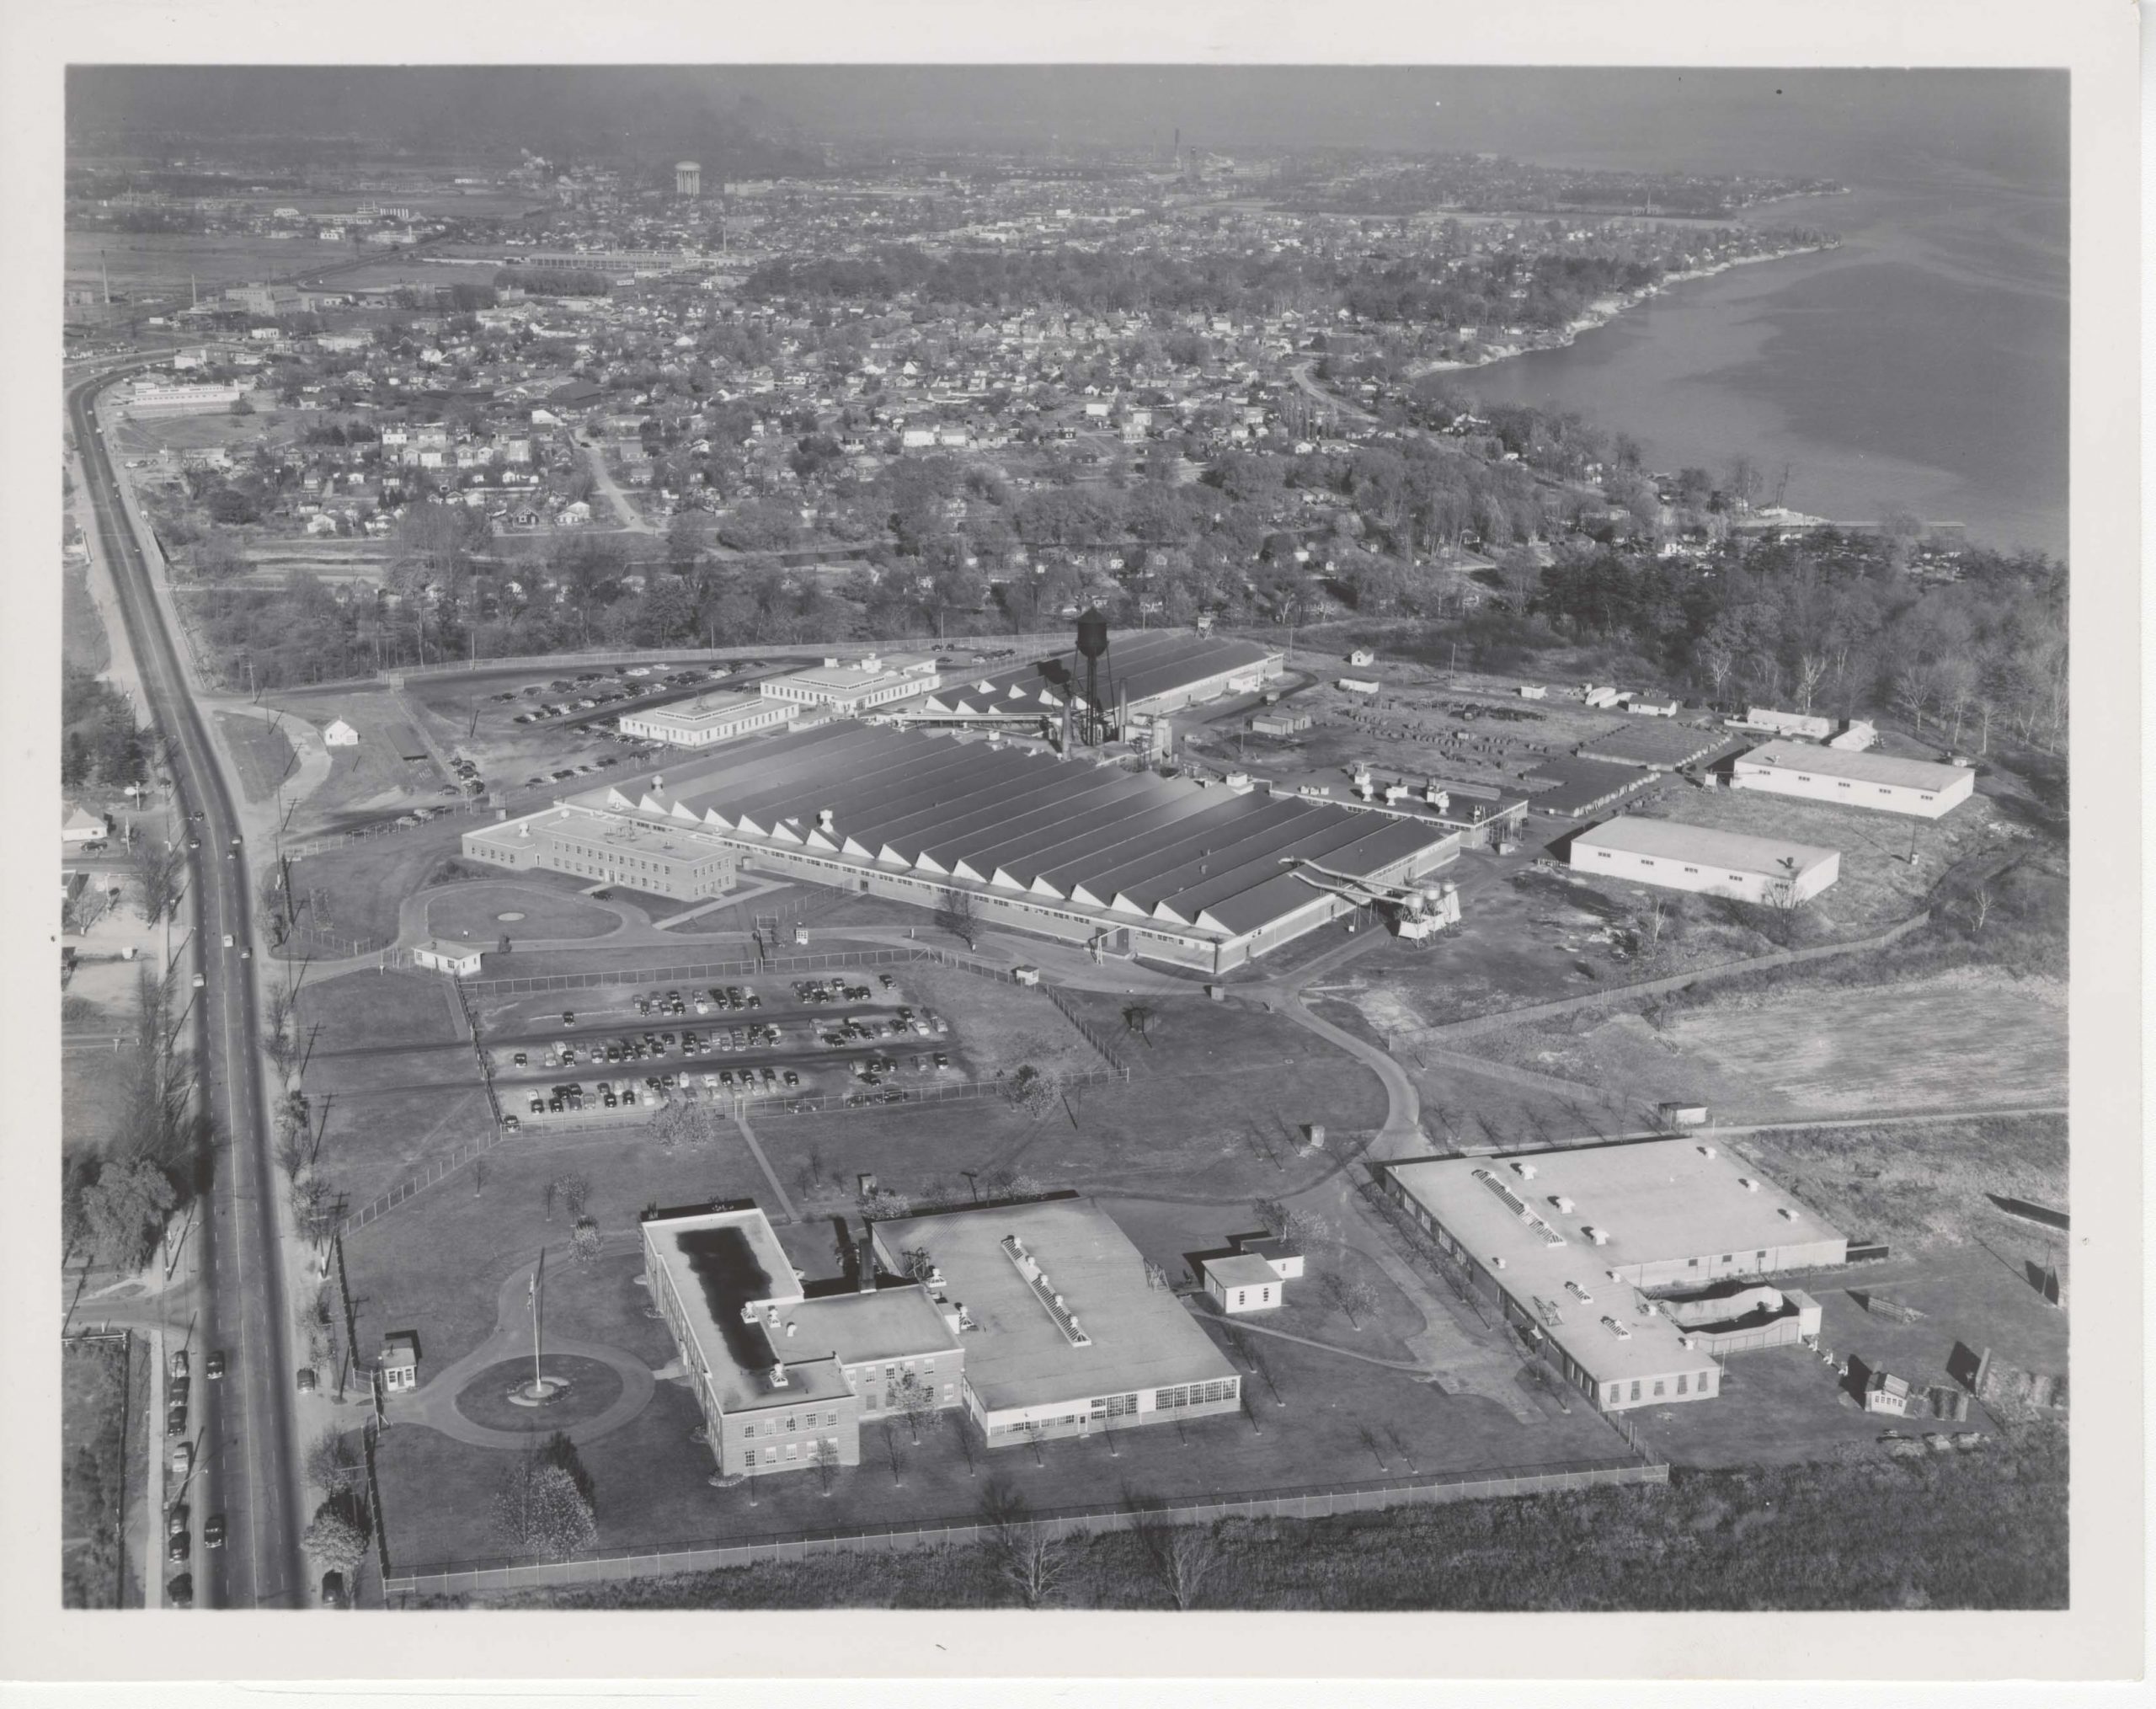 Black and white aerial photograph of the Small Arms Building in 1955